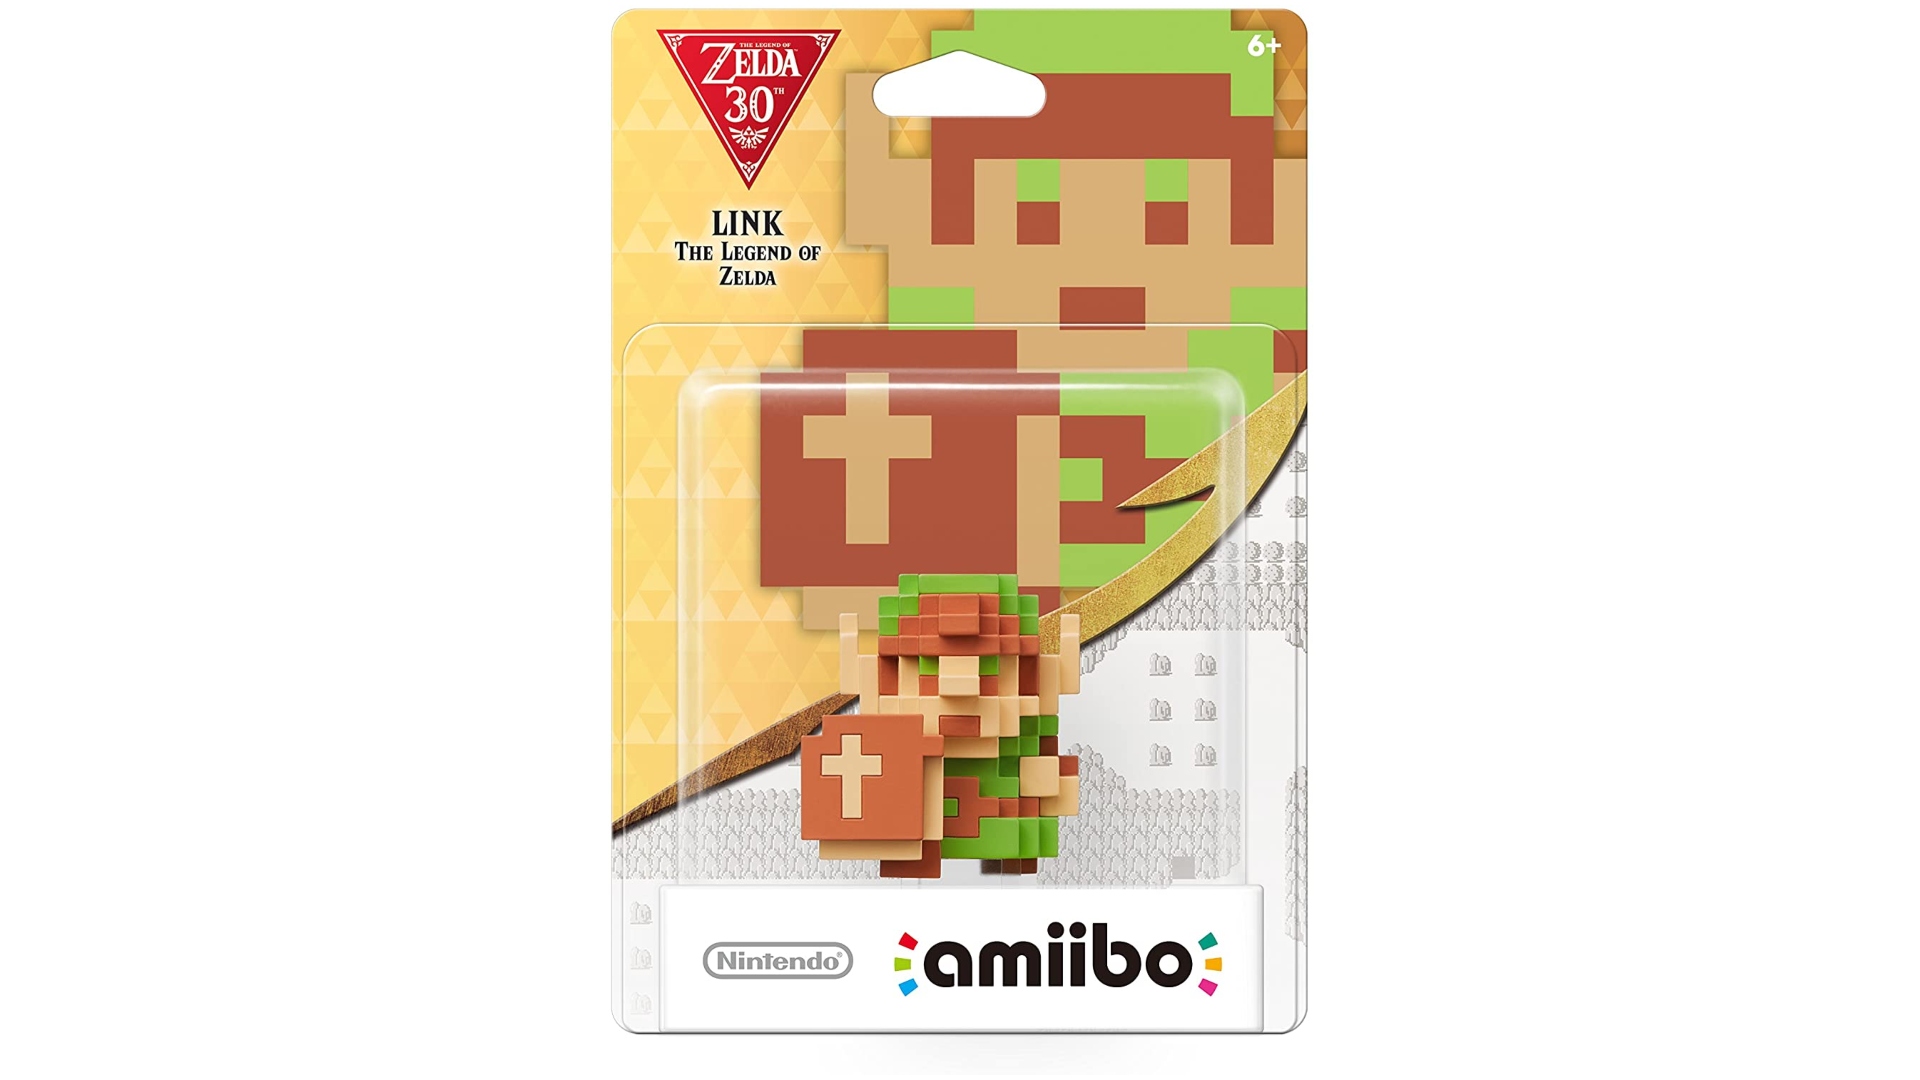 Nintendo Gifts: image shows an 8-Bit Link amiibo in its box.